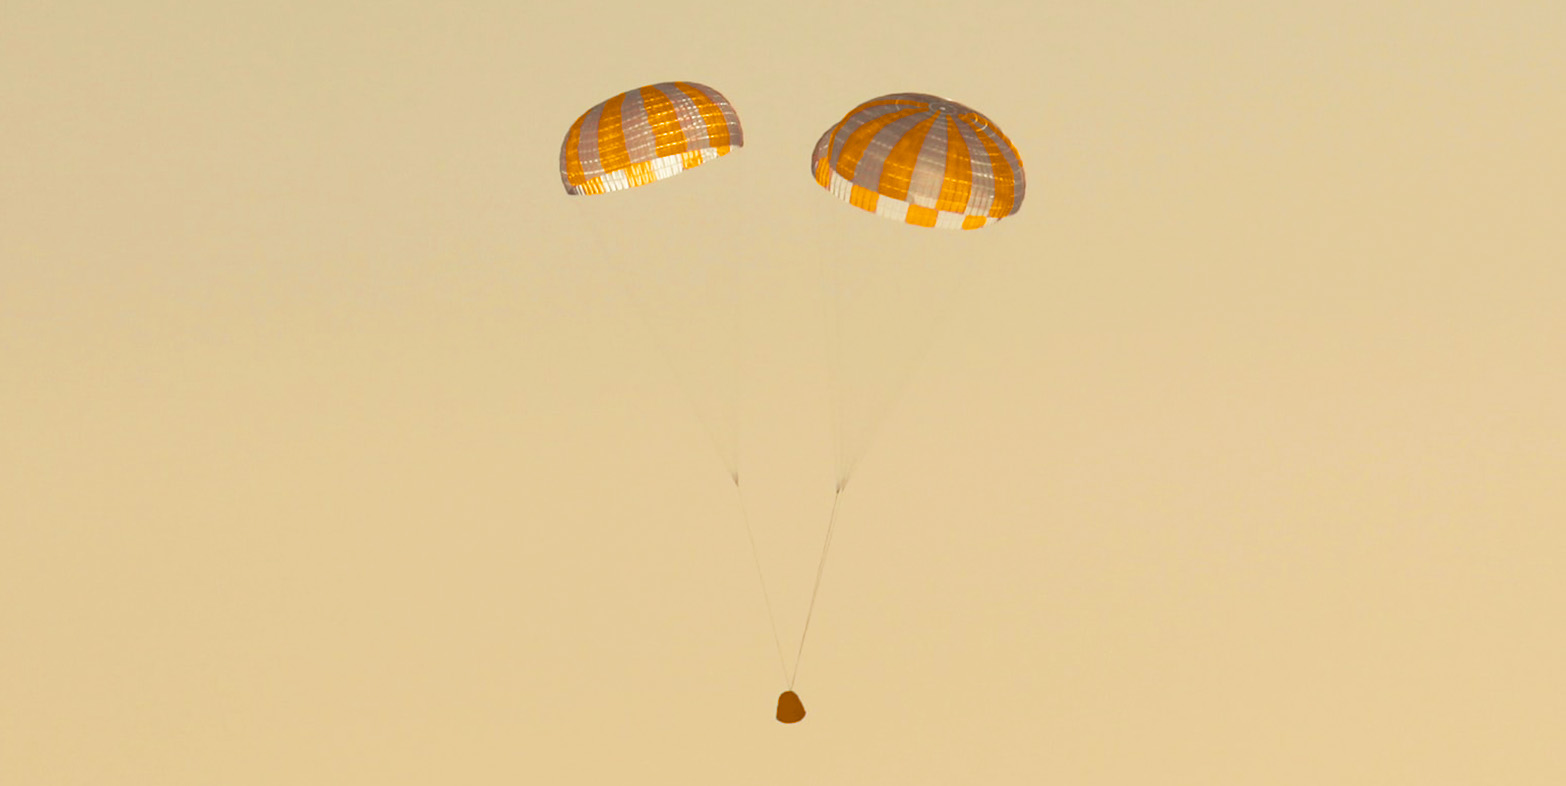 Small object dropping held up by parachutes